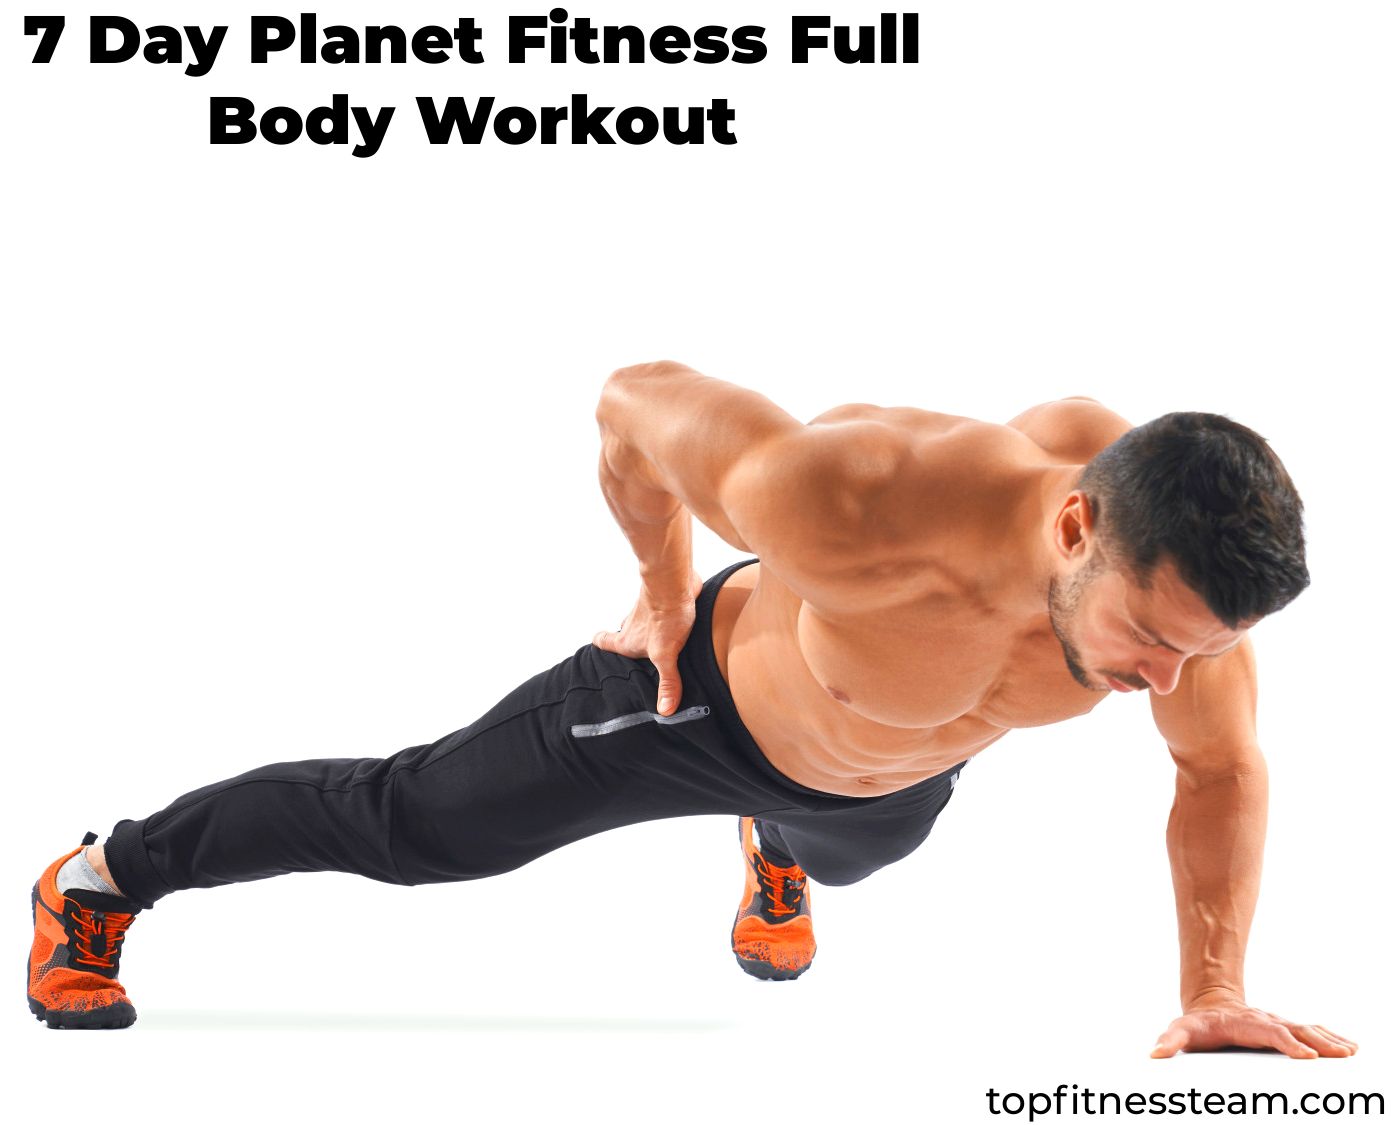 7-Day Full Body Planet Fitness Workout